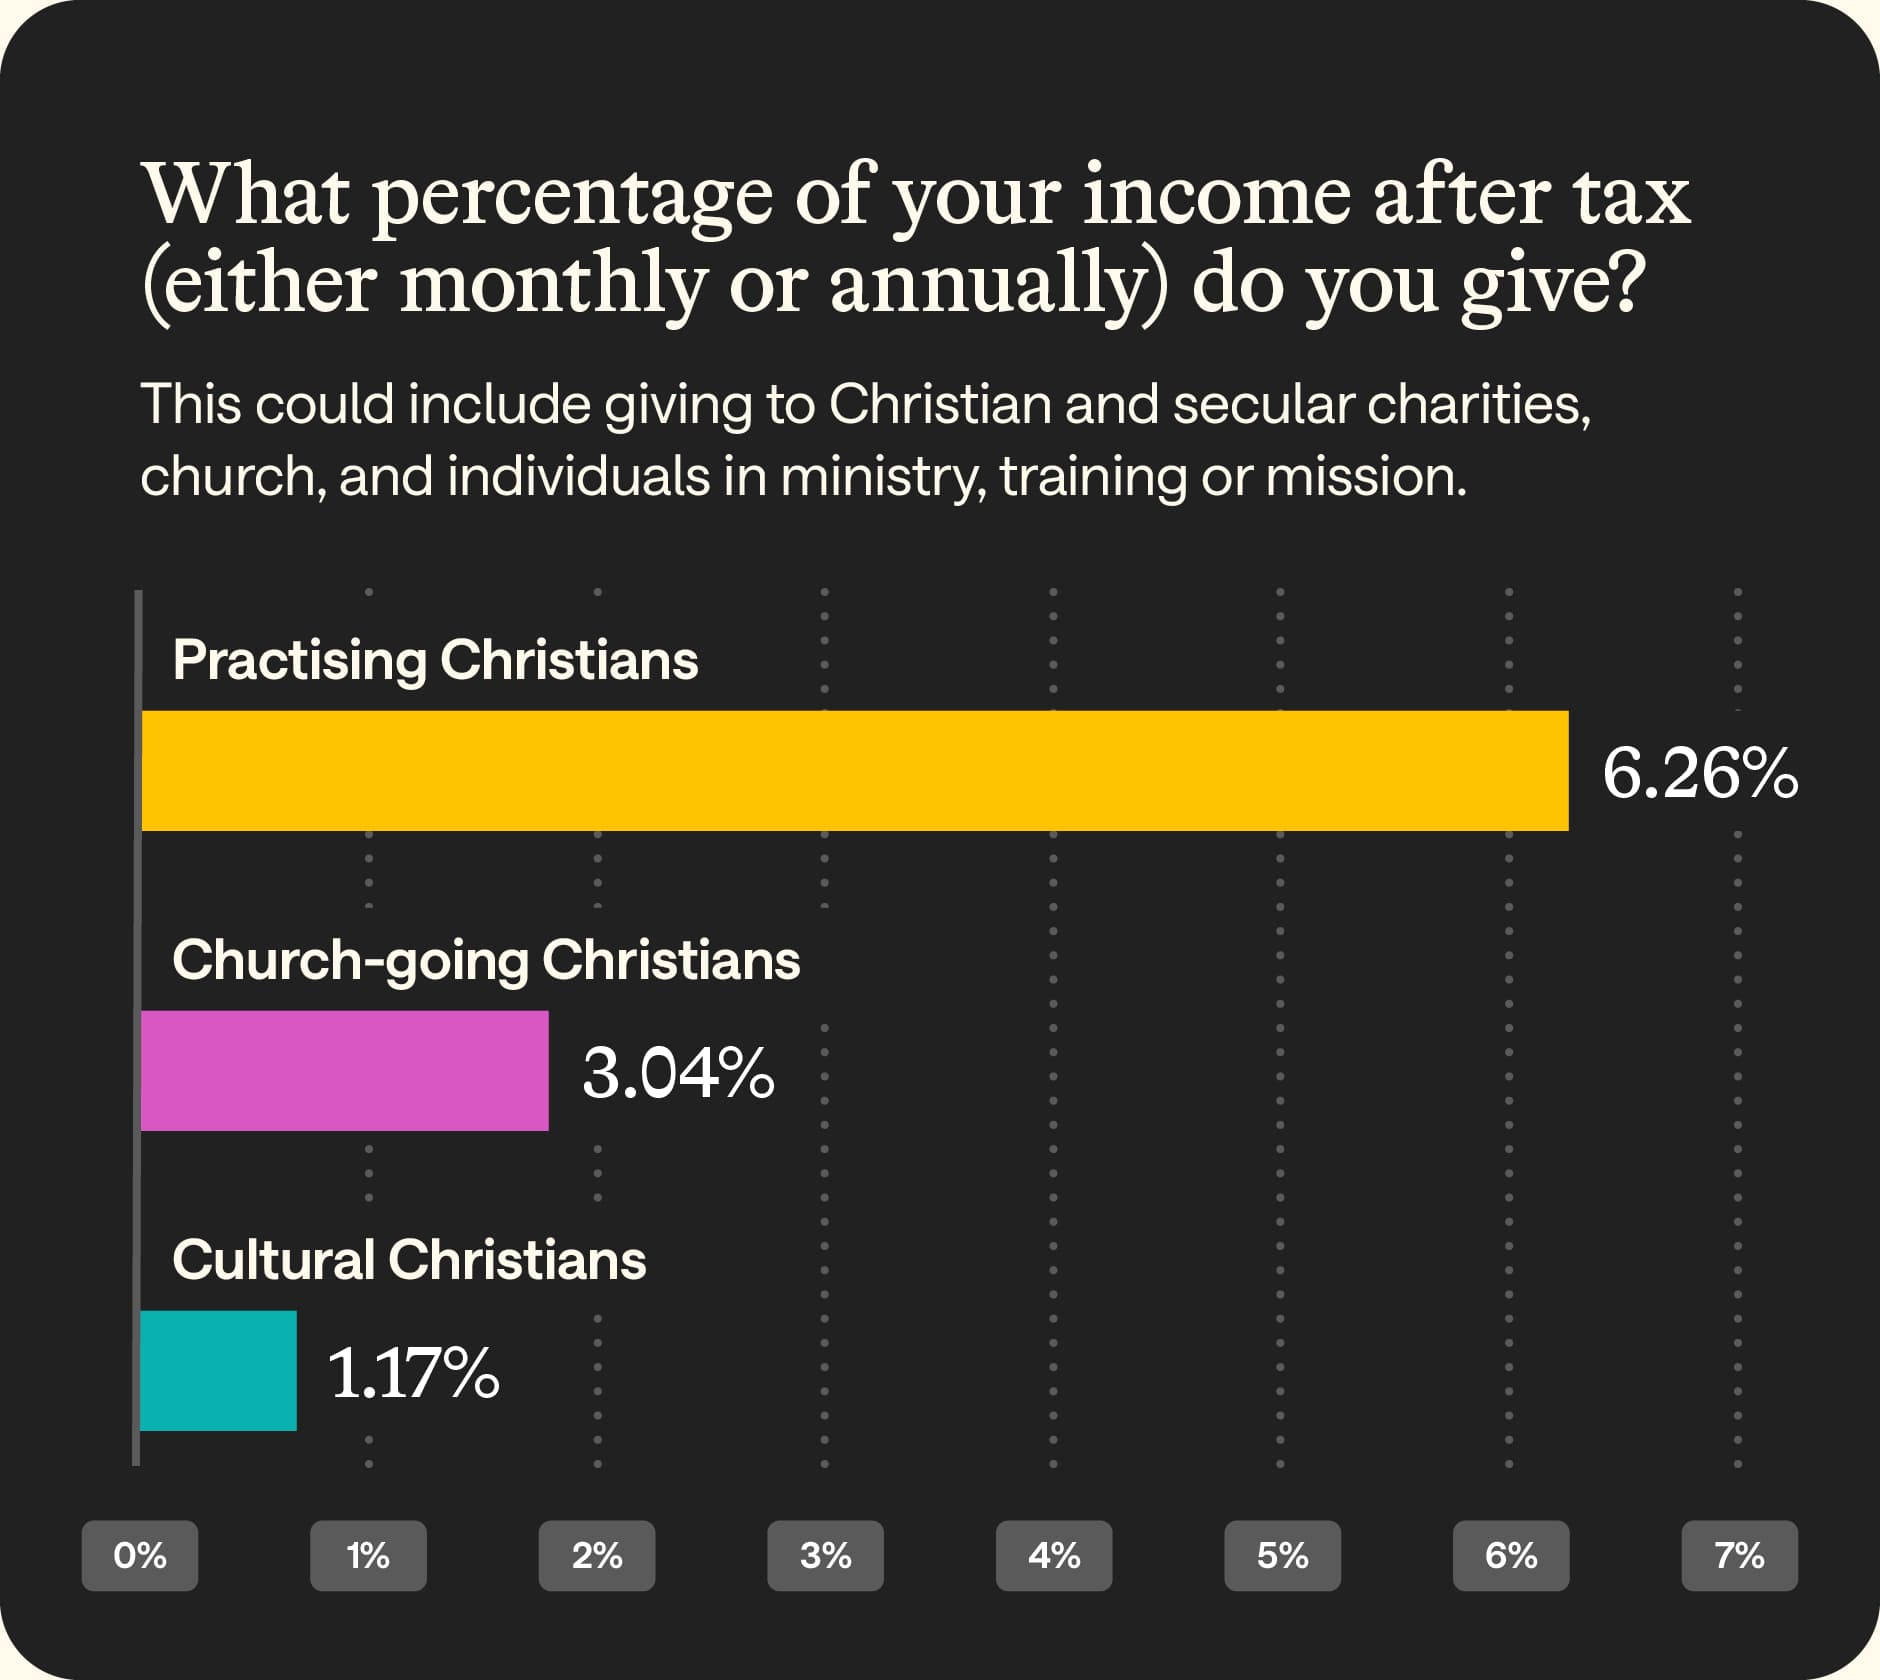 Graph to show the percentage of income after tax Christians give